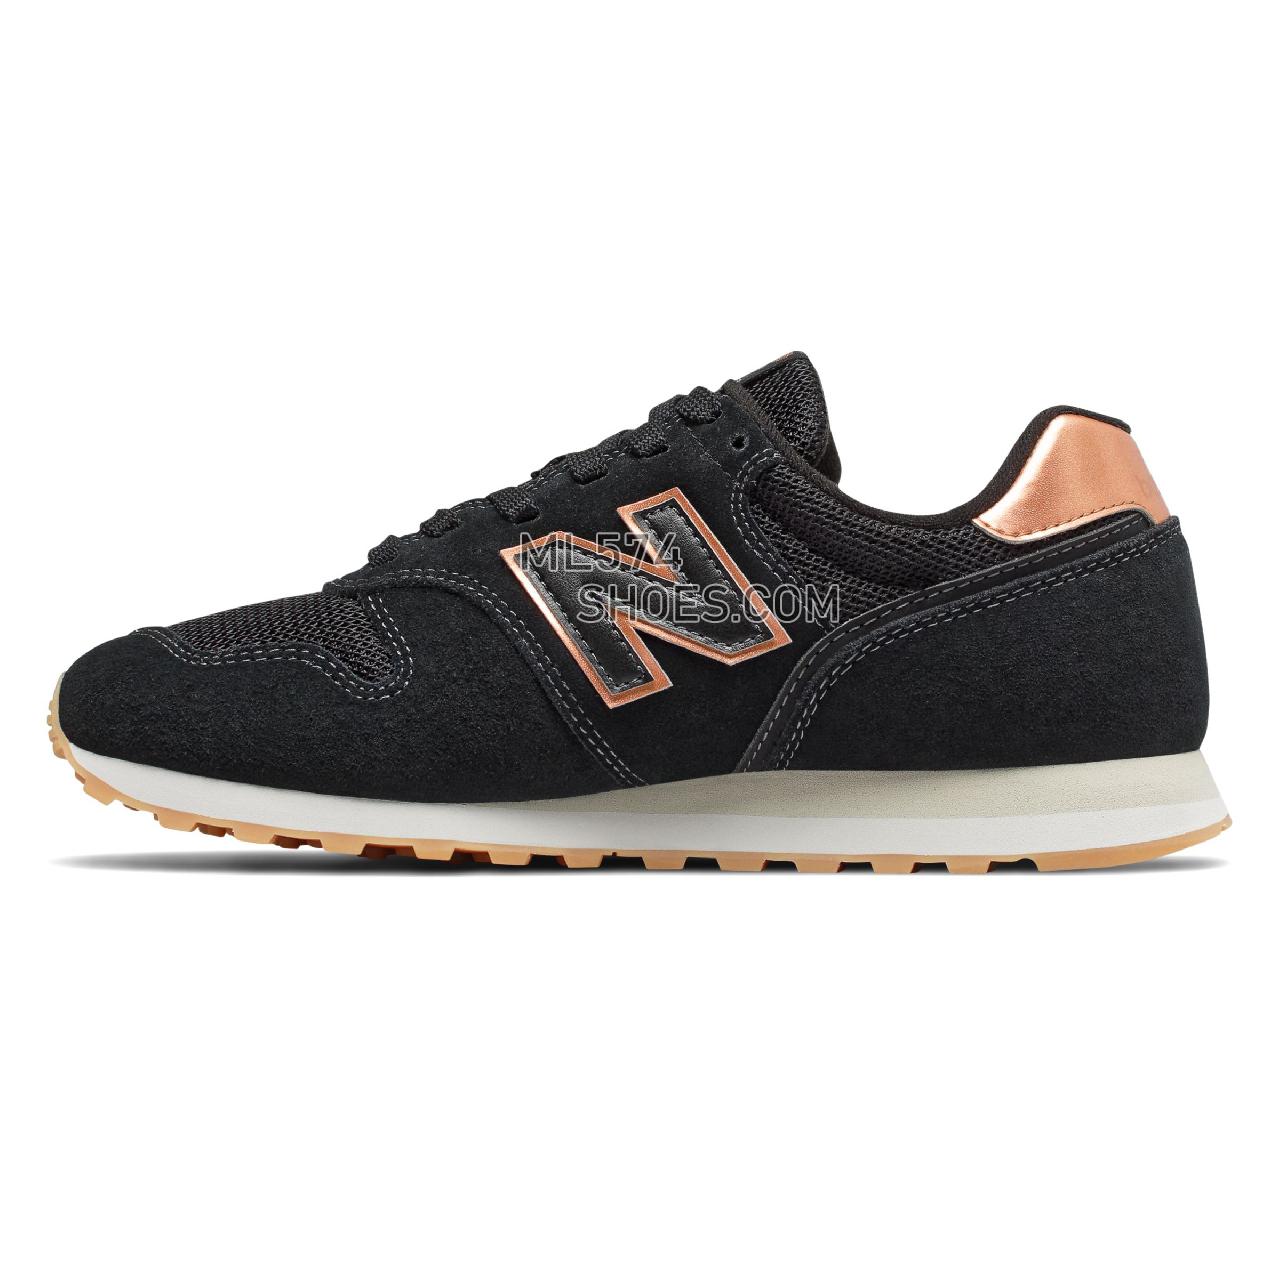 New Balance 373 - Women's 373 Classic - Black with Copper - WL373CE2